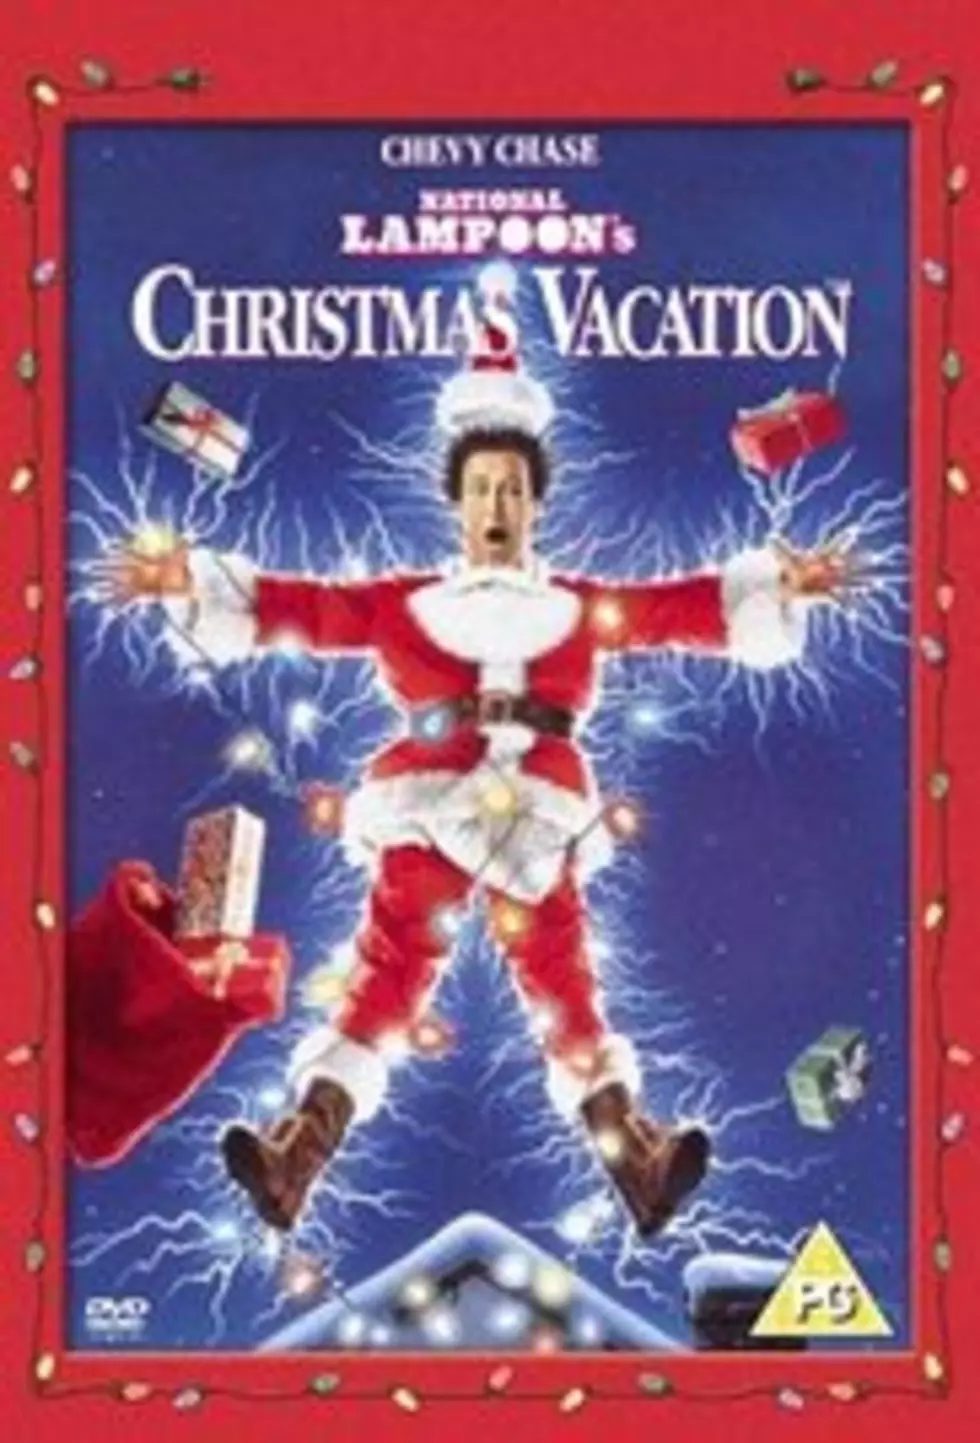 10 Random Facts About ‘National Lampoon’s Christmas Vacation’